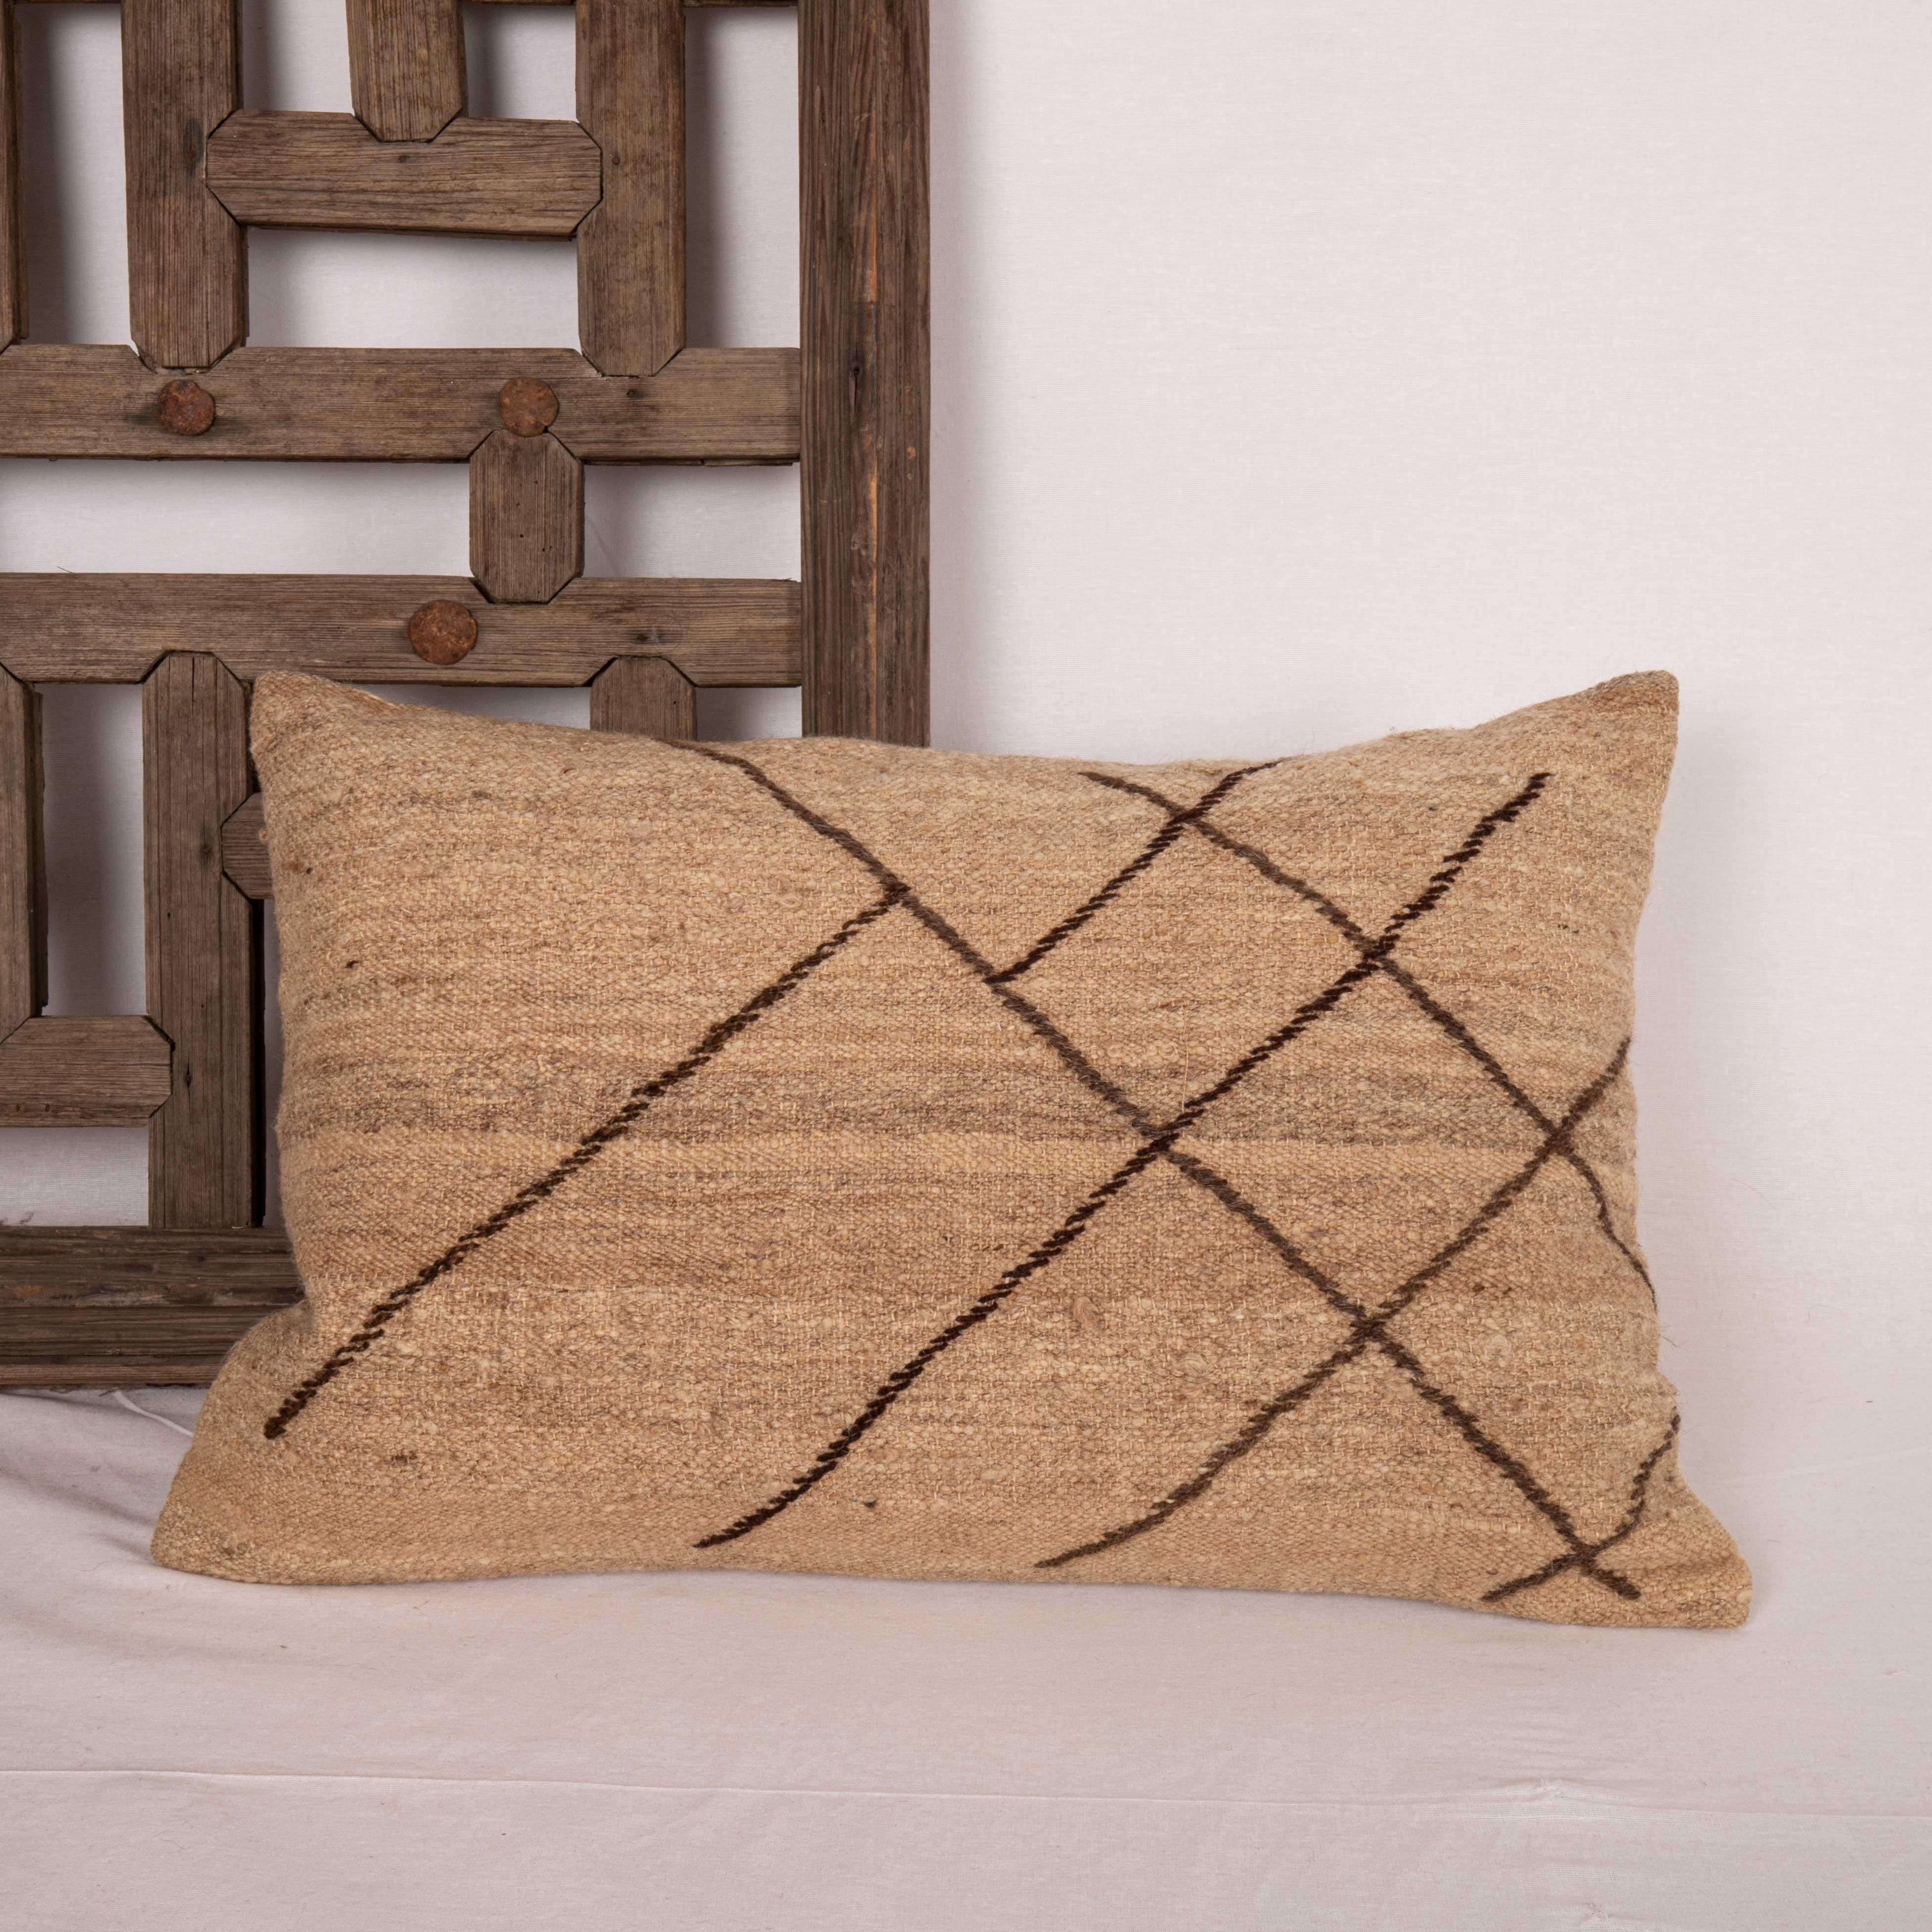 The materials this pillowcase is made from purely natural, undyed wool, dating back to mid 20th C.
Embroidered design elements on it are our design and they are purely hand done on the vintage materials.
It does not come with an insert.
Linen in